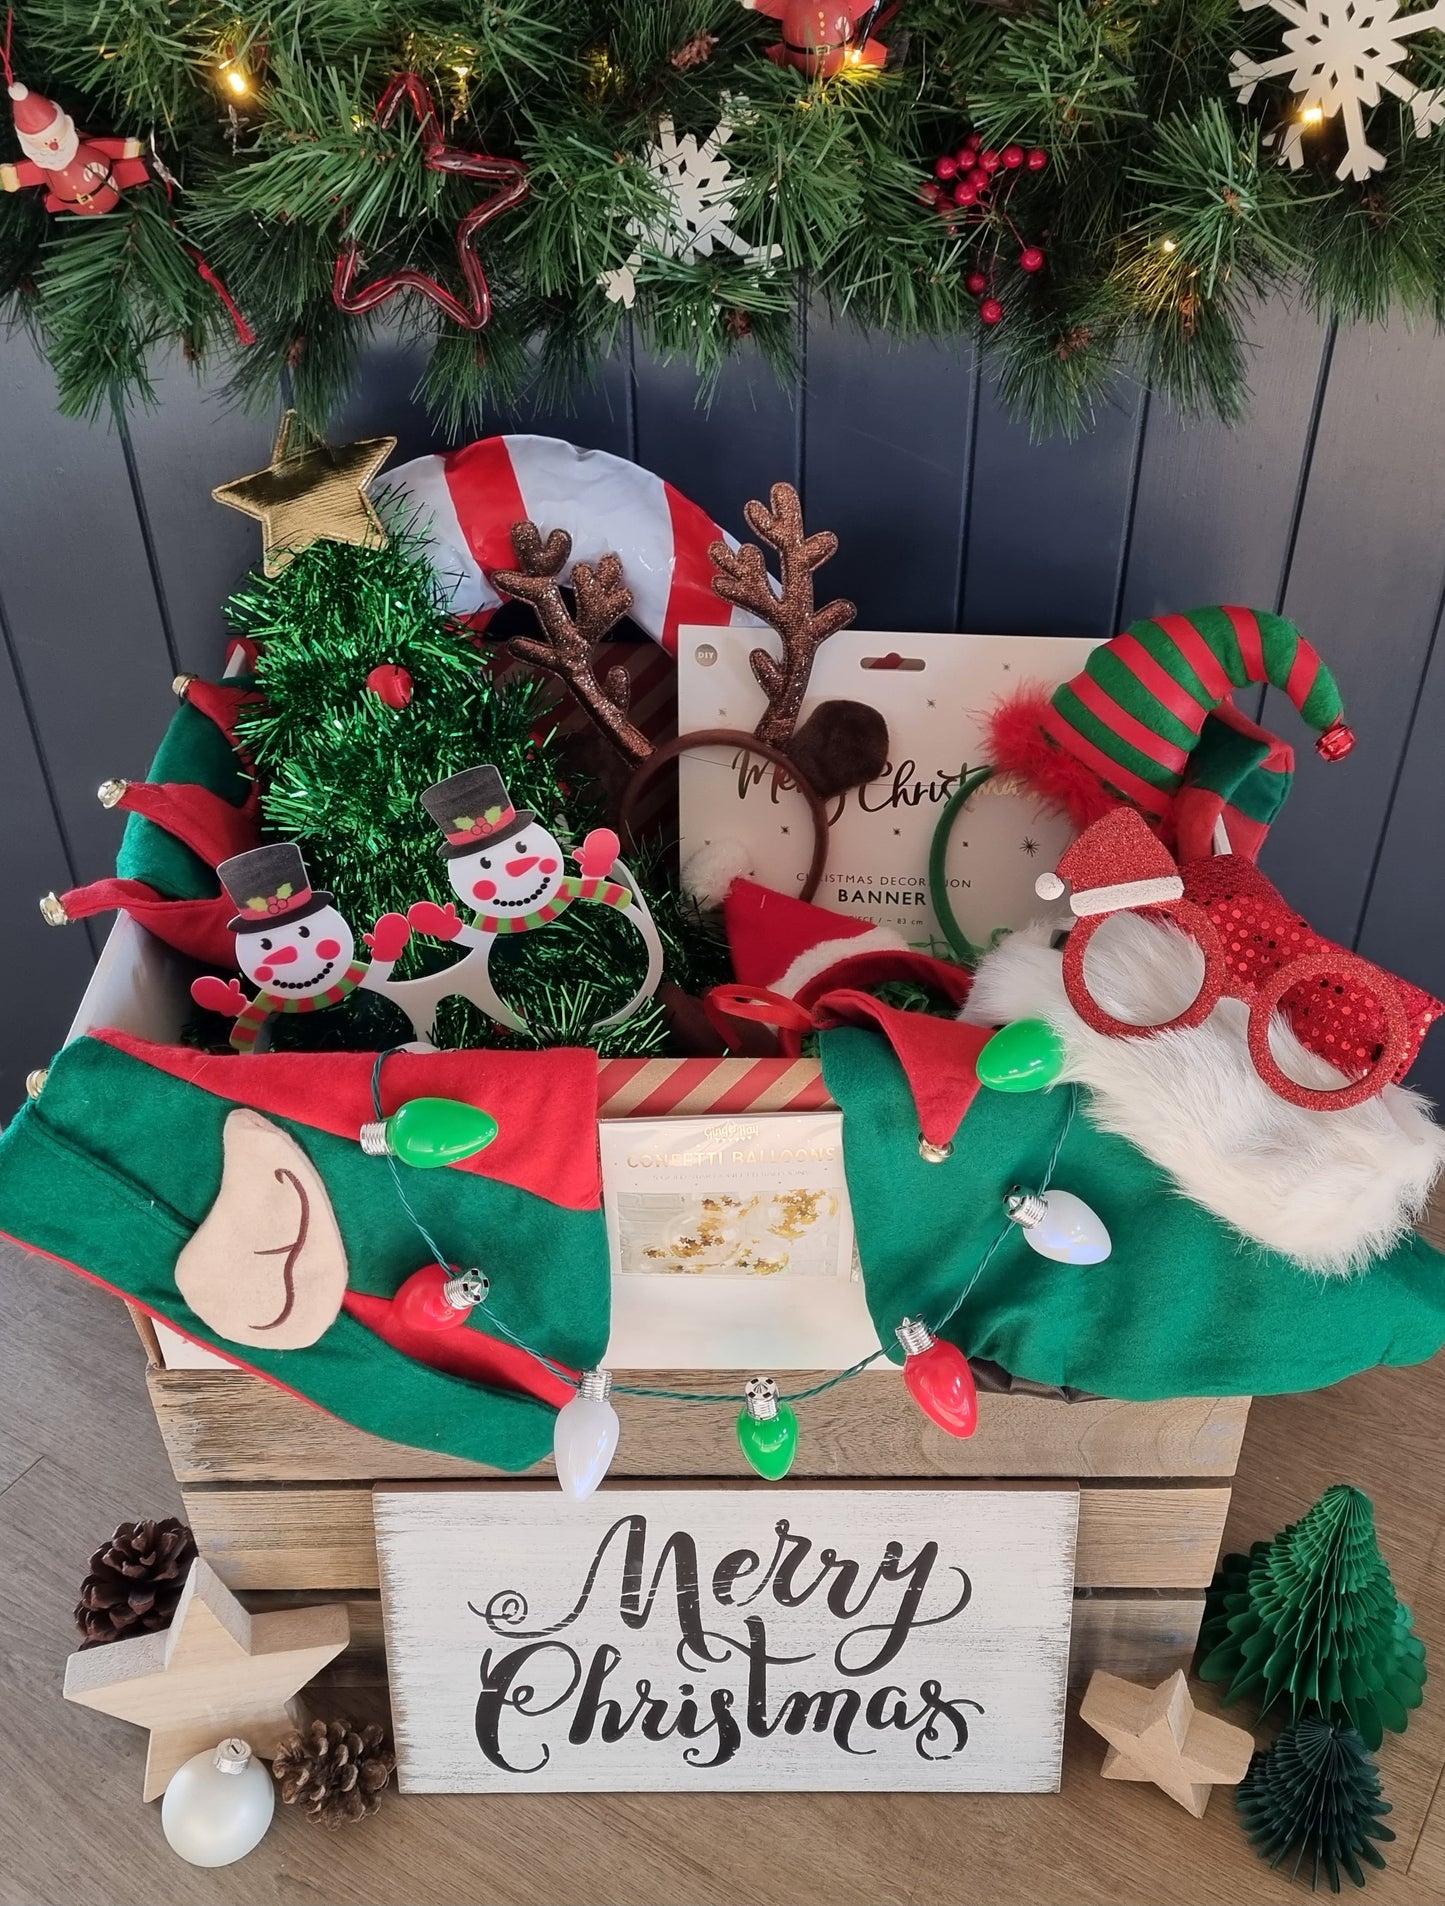 Christmas Party in a Box - Props & Accessories Box